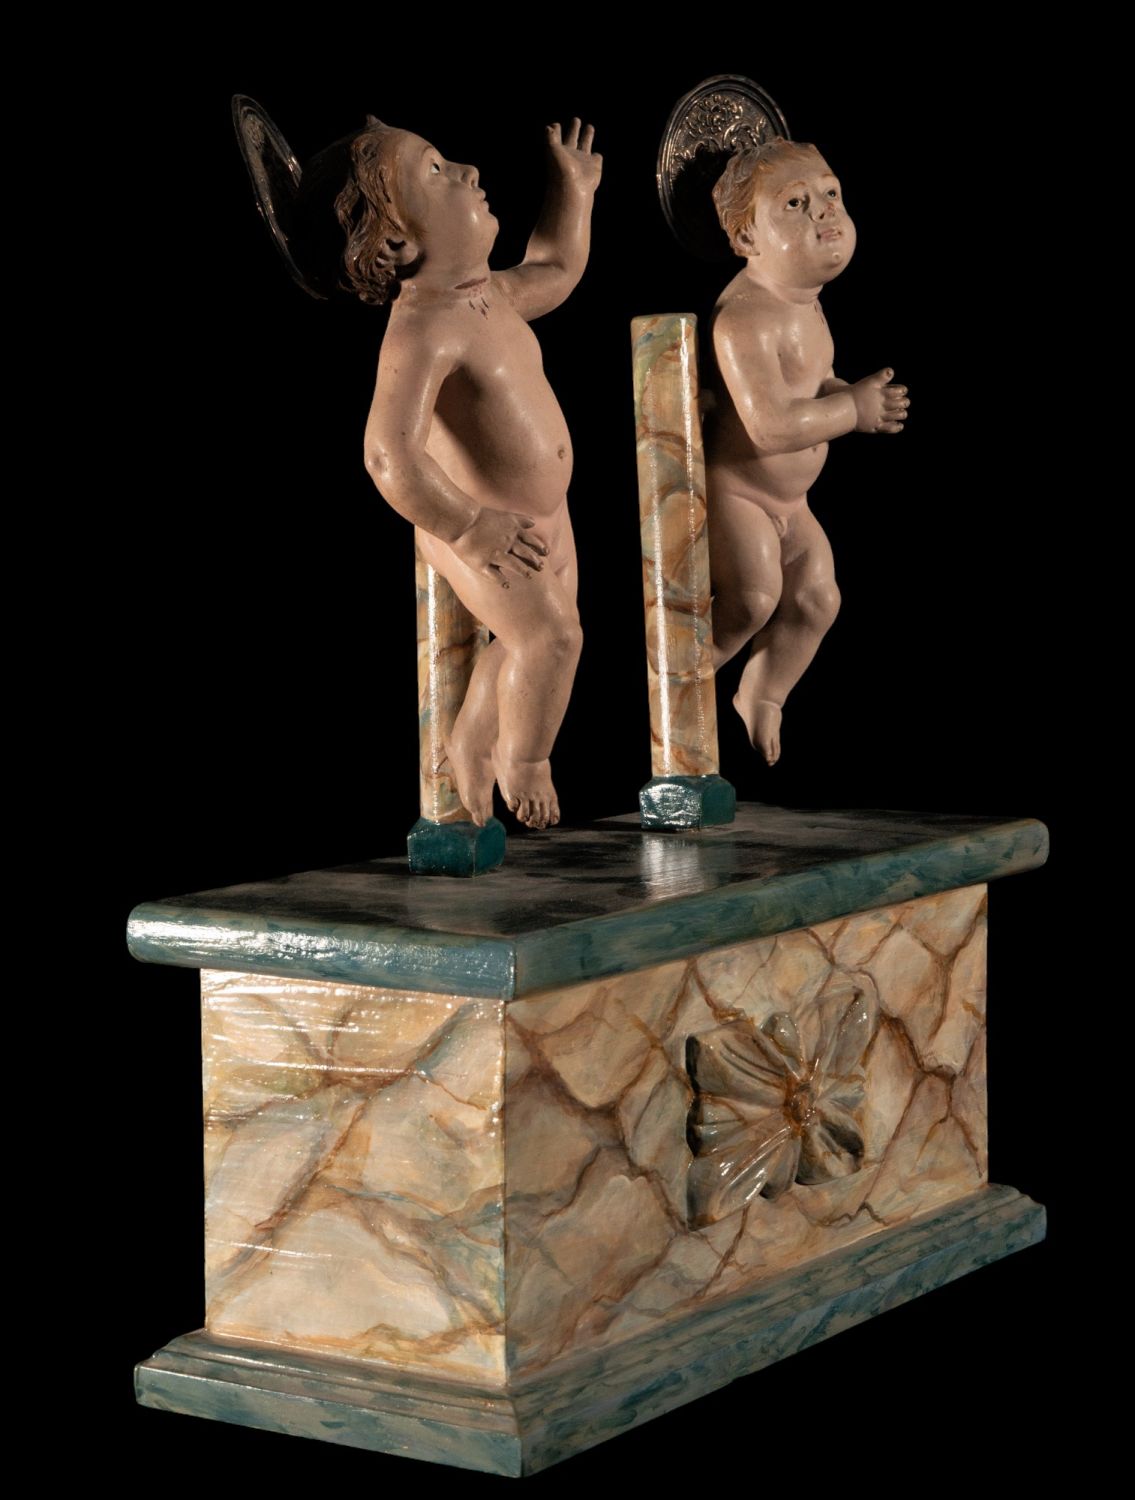 Pair of Neapolitan Holy Children with silver crowns, 18th century, Italy, Naples - Image 5 of 6